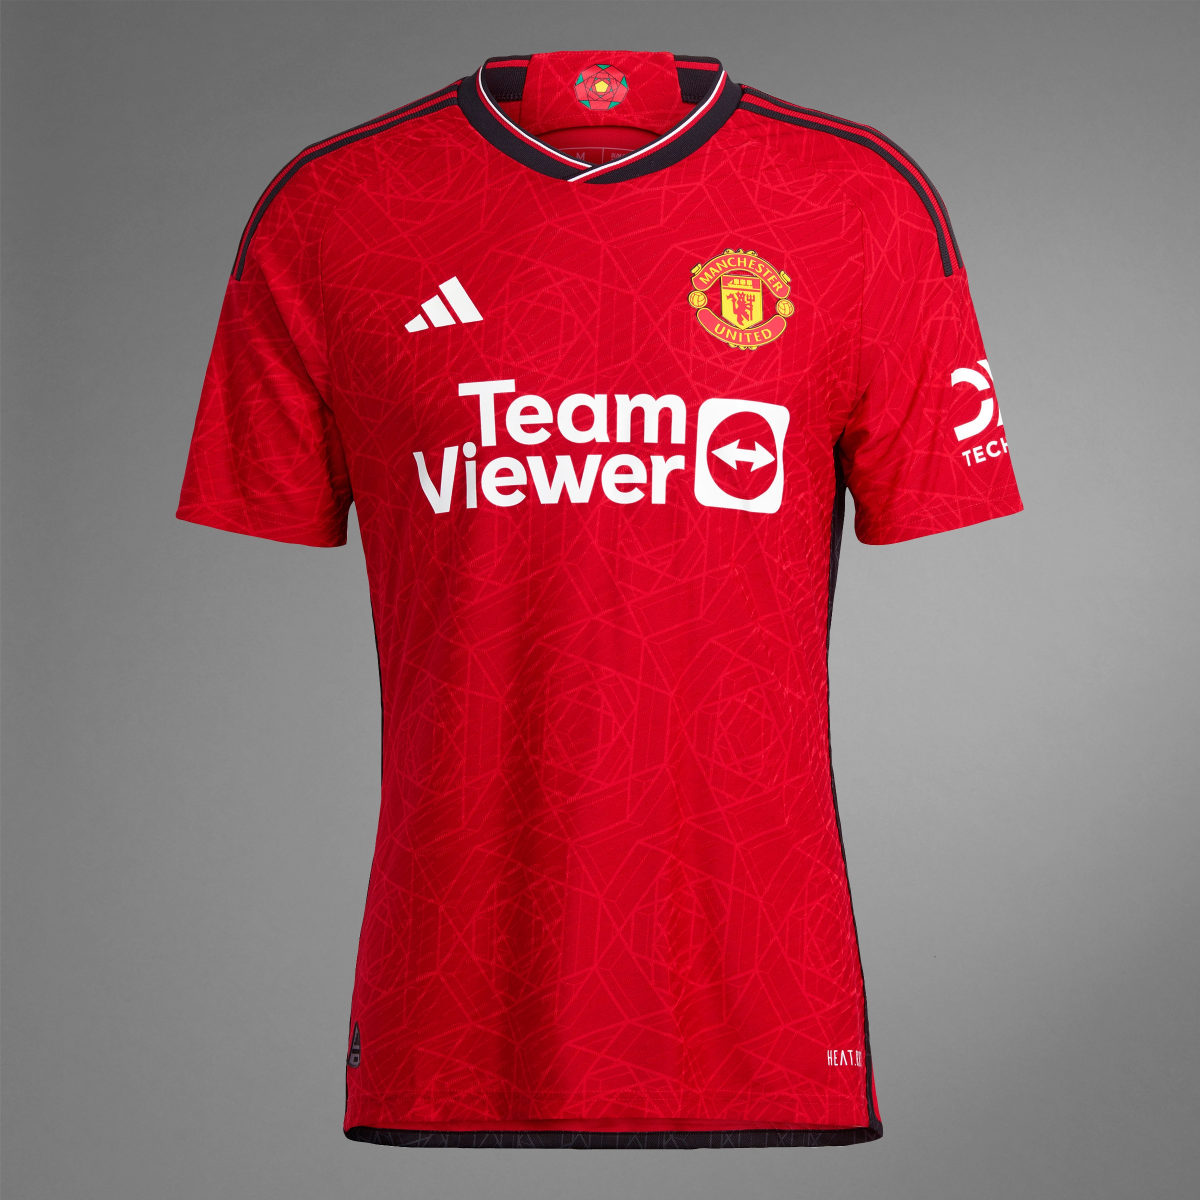 Adidas Maglia Home Authentic 23/24 Manchester United FC. 11